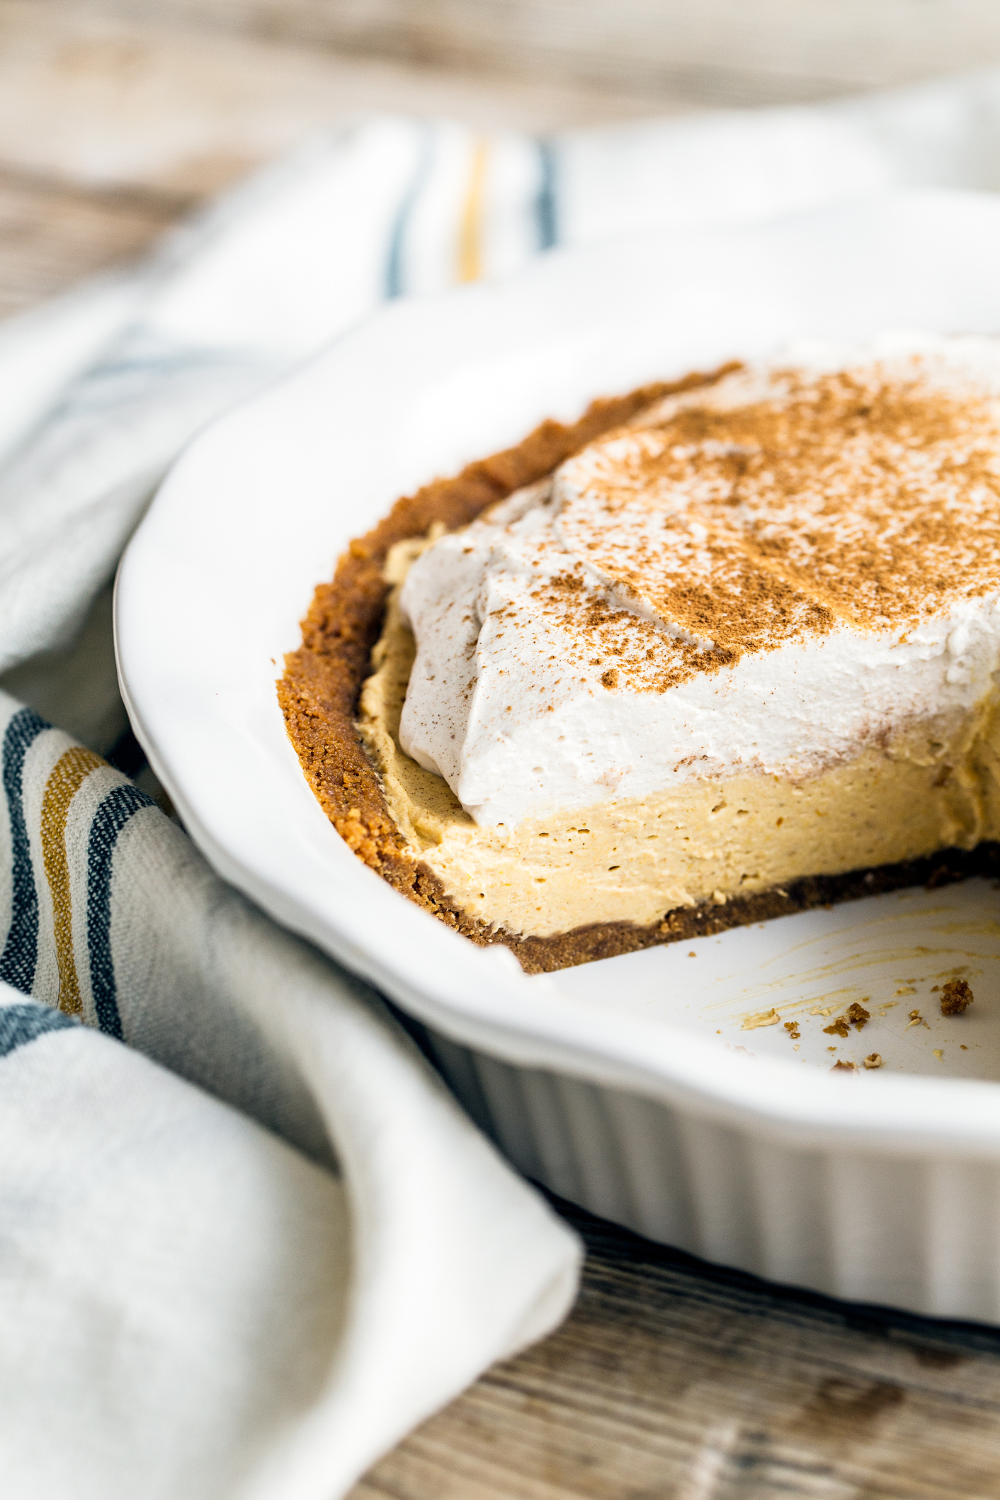 photo looking inside the No Bake Pumpkin Mousse Pie in its pan, showing the depth and texture of this pie's filling.